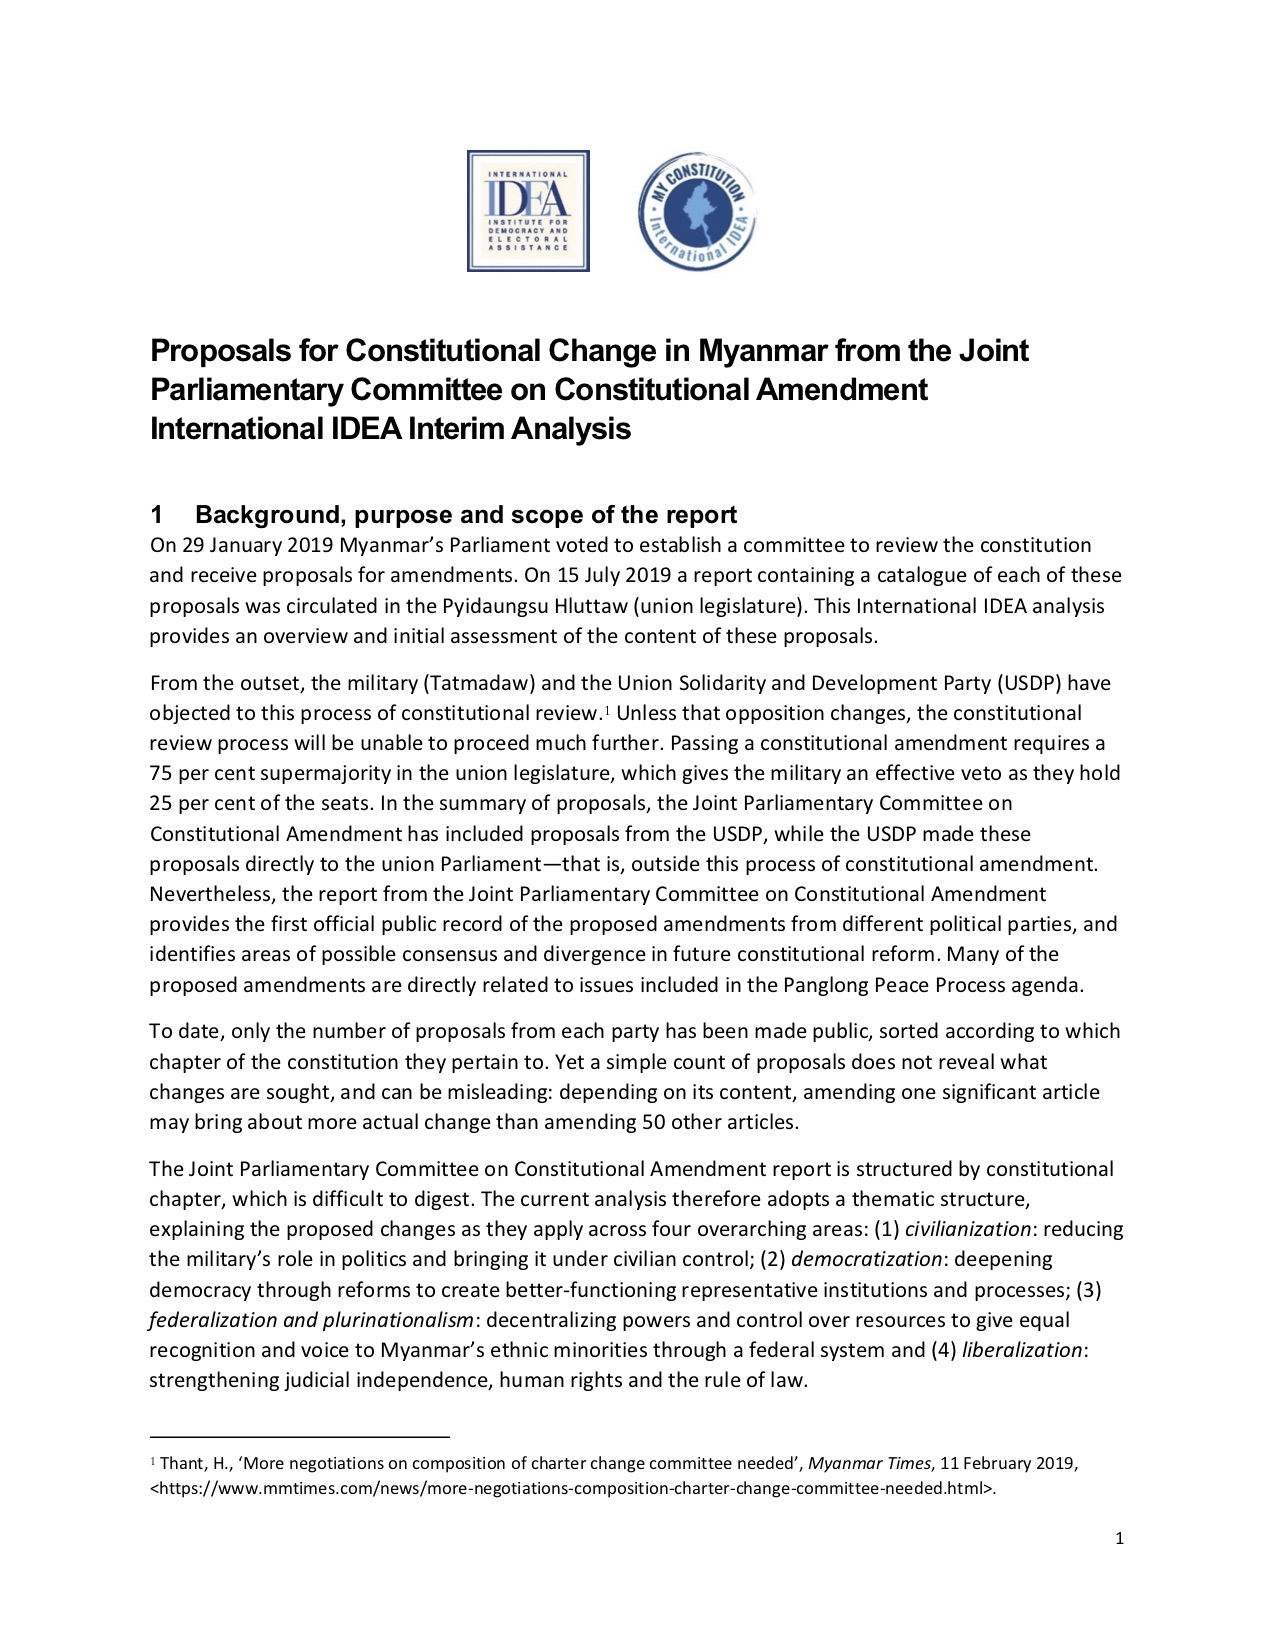 Proposals for Constitutional Change in Myanmar from the Joint Parliamentary Committee on Constitutional Amendment: International IDEA Interim Analysis